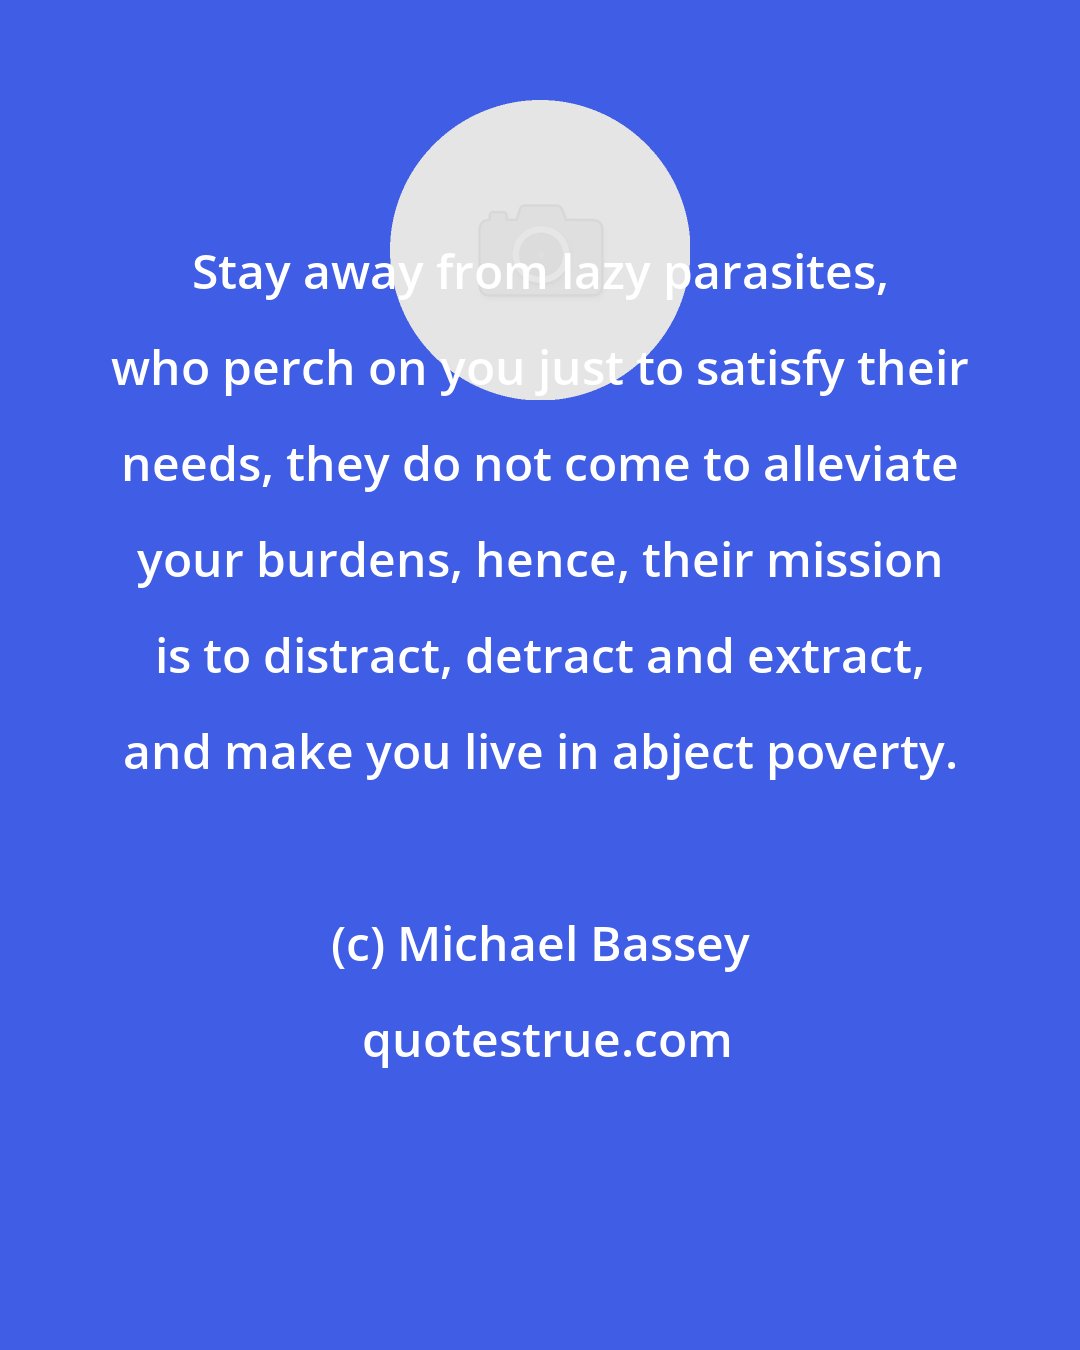 Michael Bassey: Stay away from lazy parasites, who perch on you just to satisfy their needs, they do not come to alleviate your burdens, hence, their mission is to distract, detract and extract, and make you live in abject poverty.